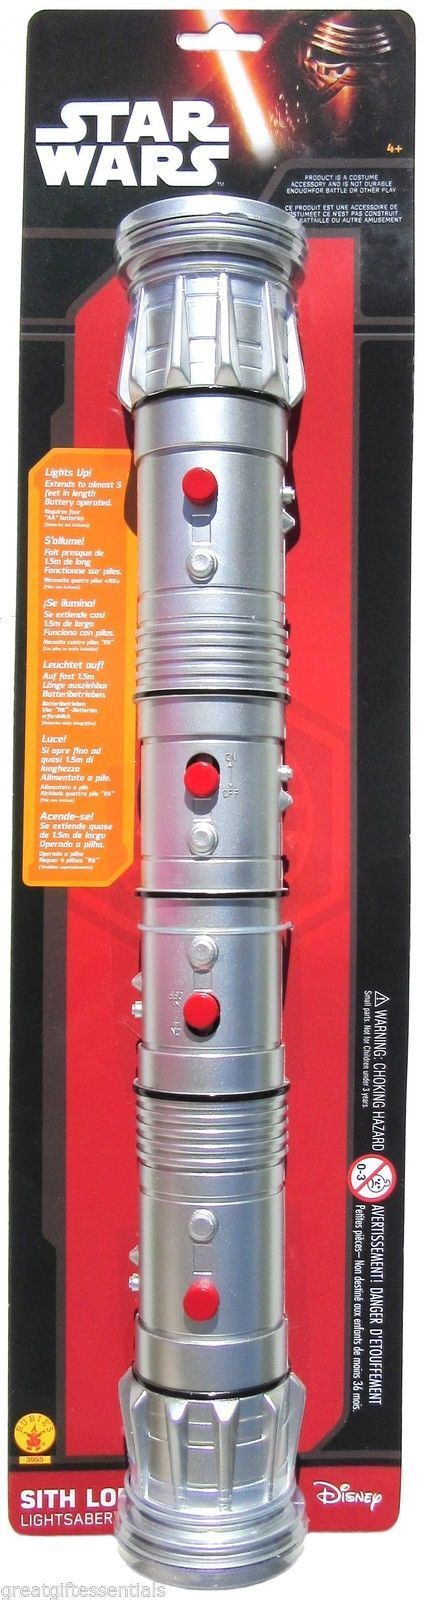 STAR WARS Light Saber DOUBLE RED DARTH MAUL SITH LORD Lightsaber Licensed NEW Без бренда